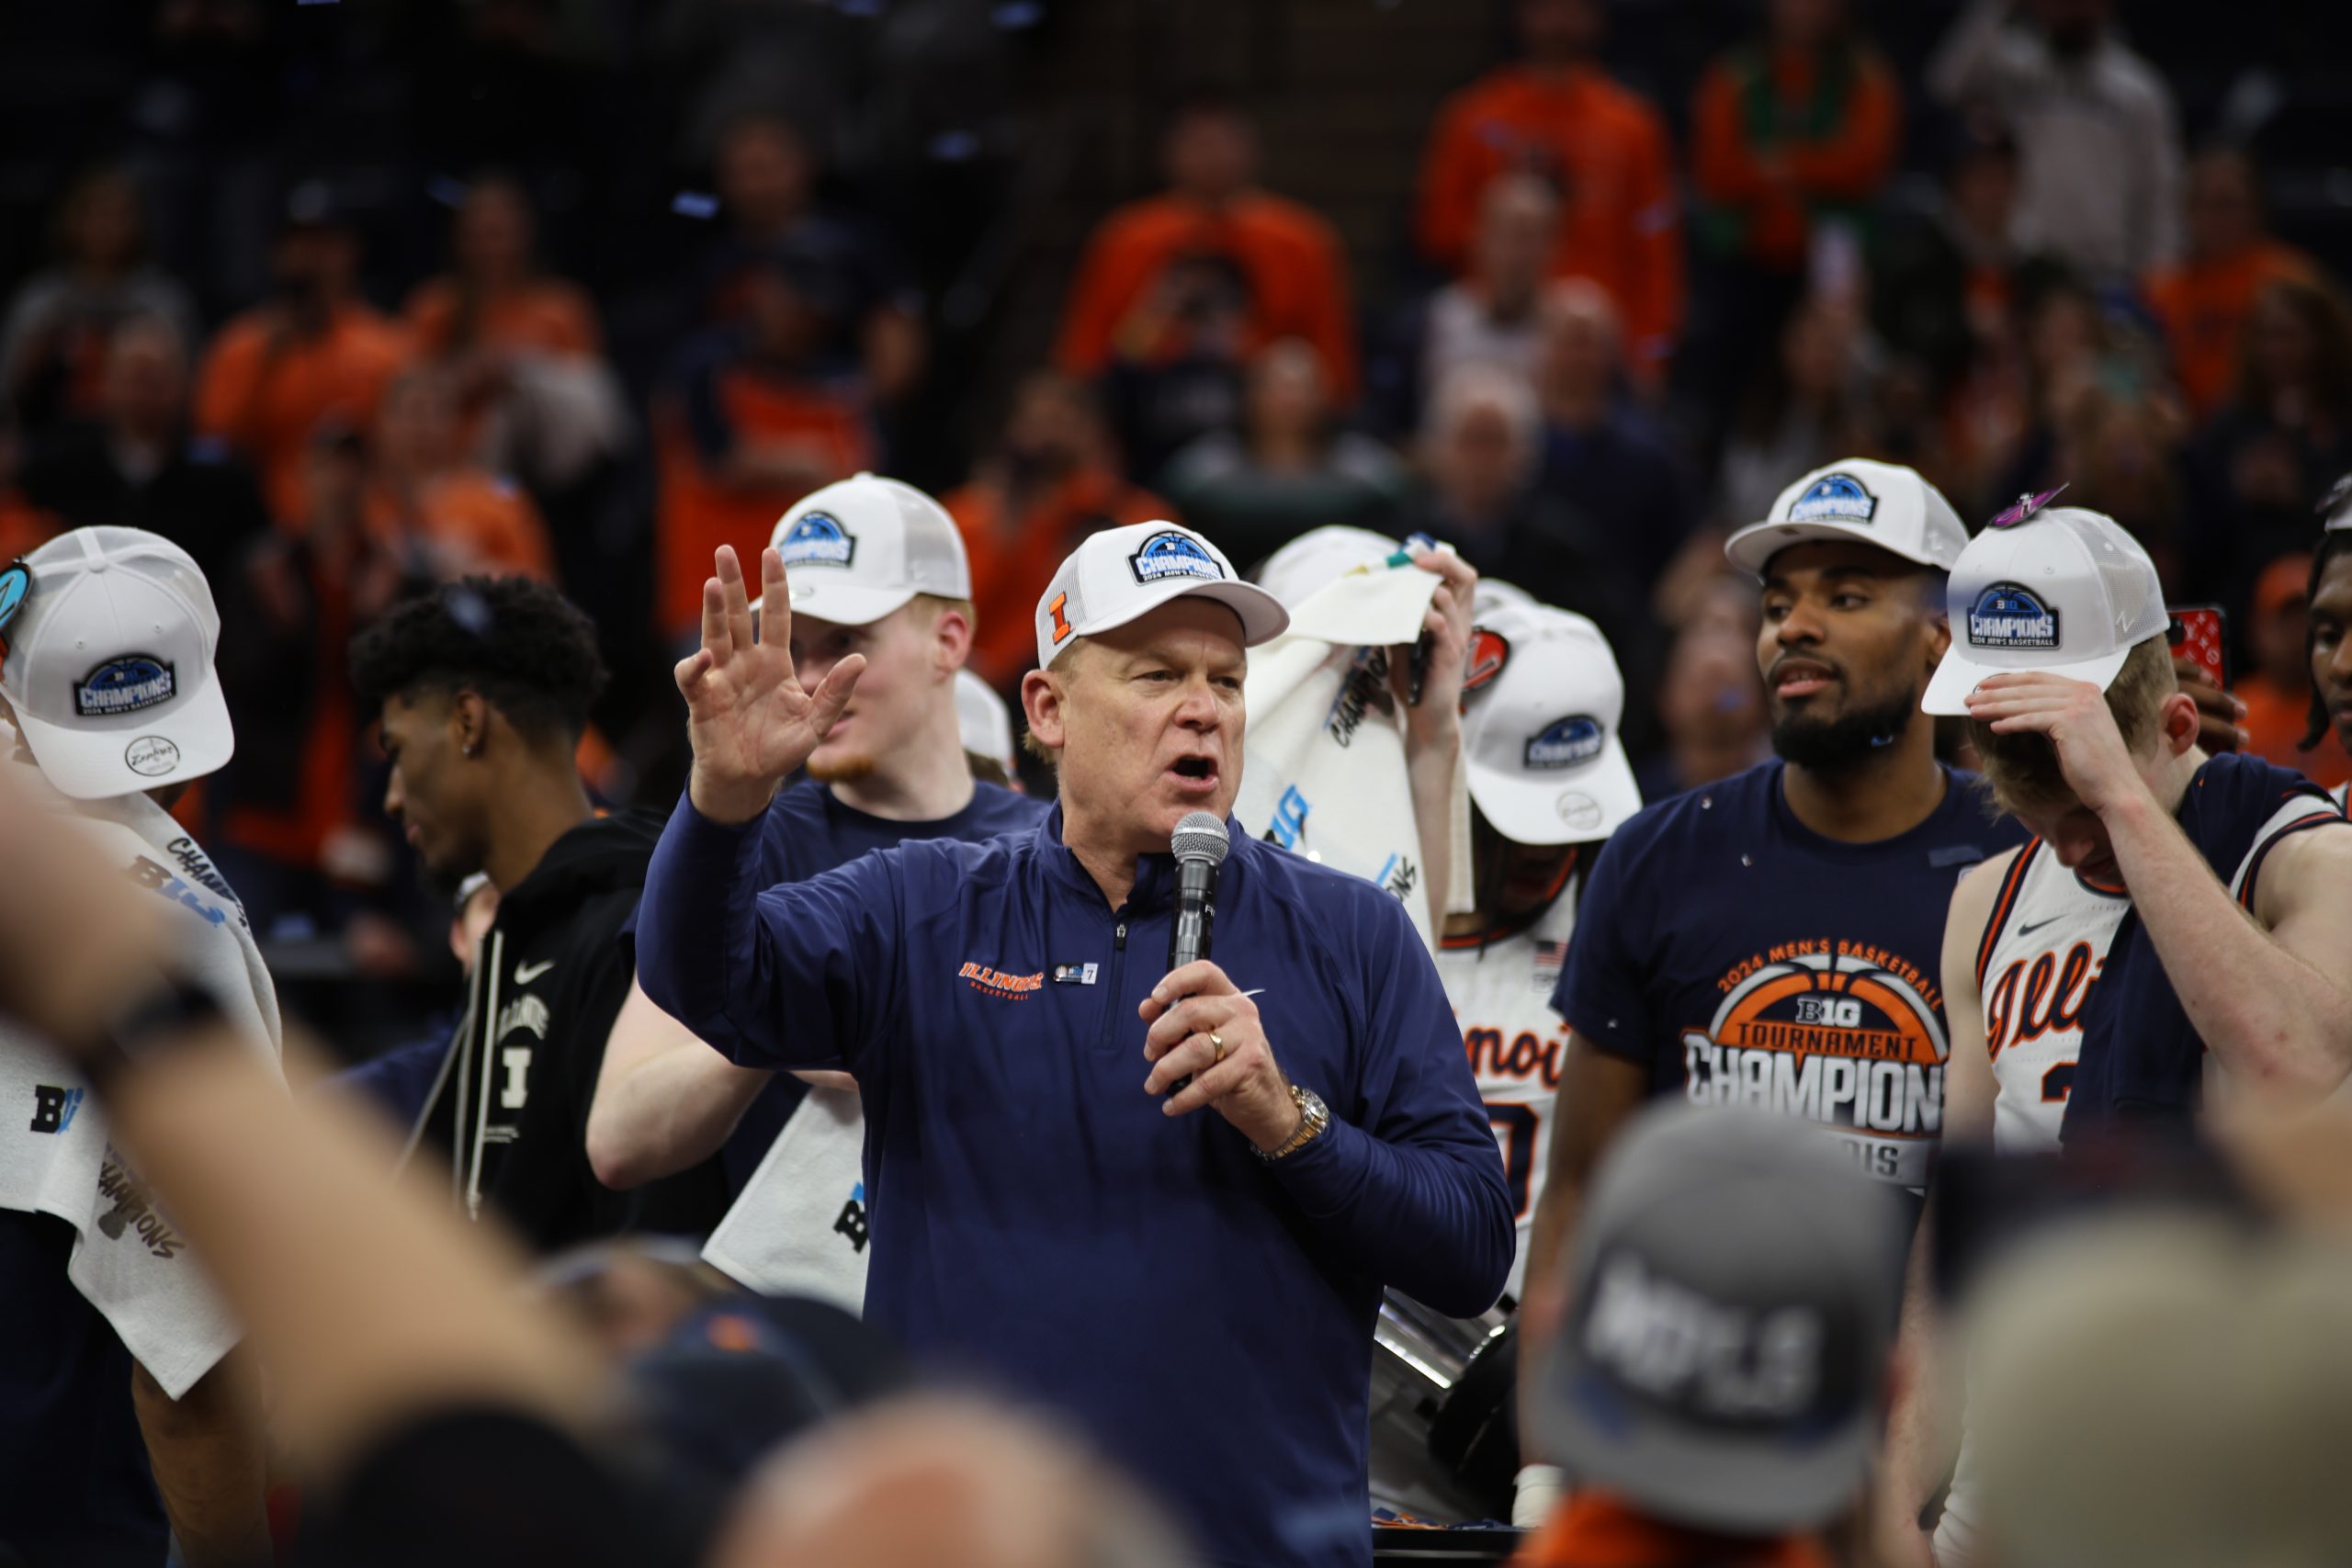 Underwood on Illini’s NCAA Sweet 16 Drought: “I came here to win a national championship”